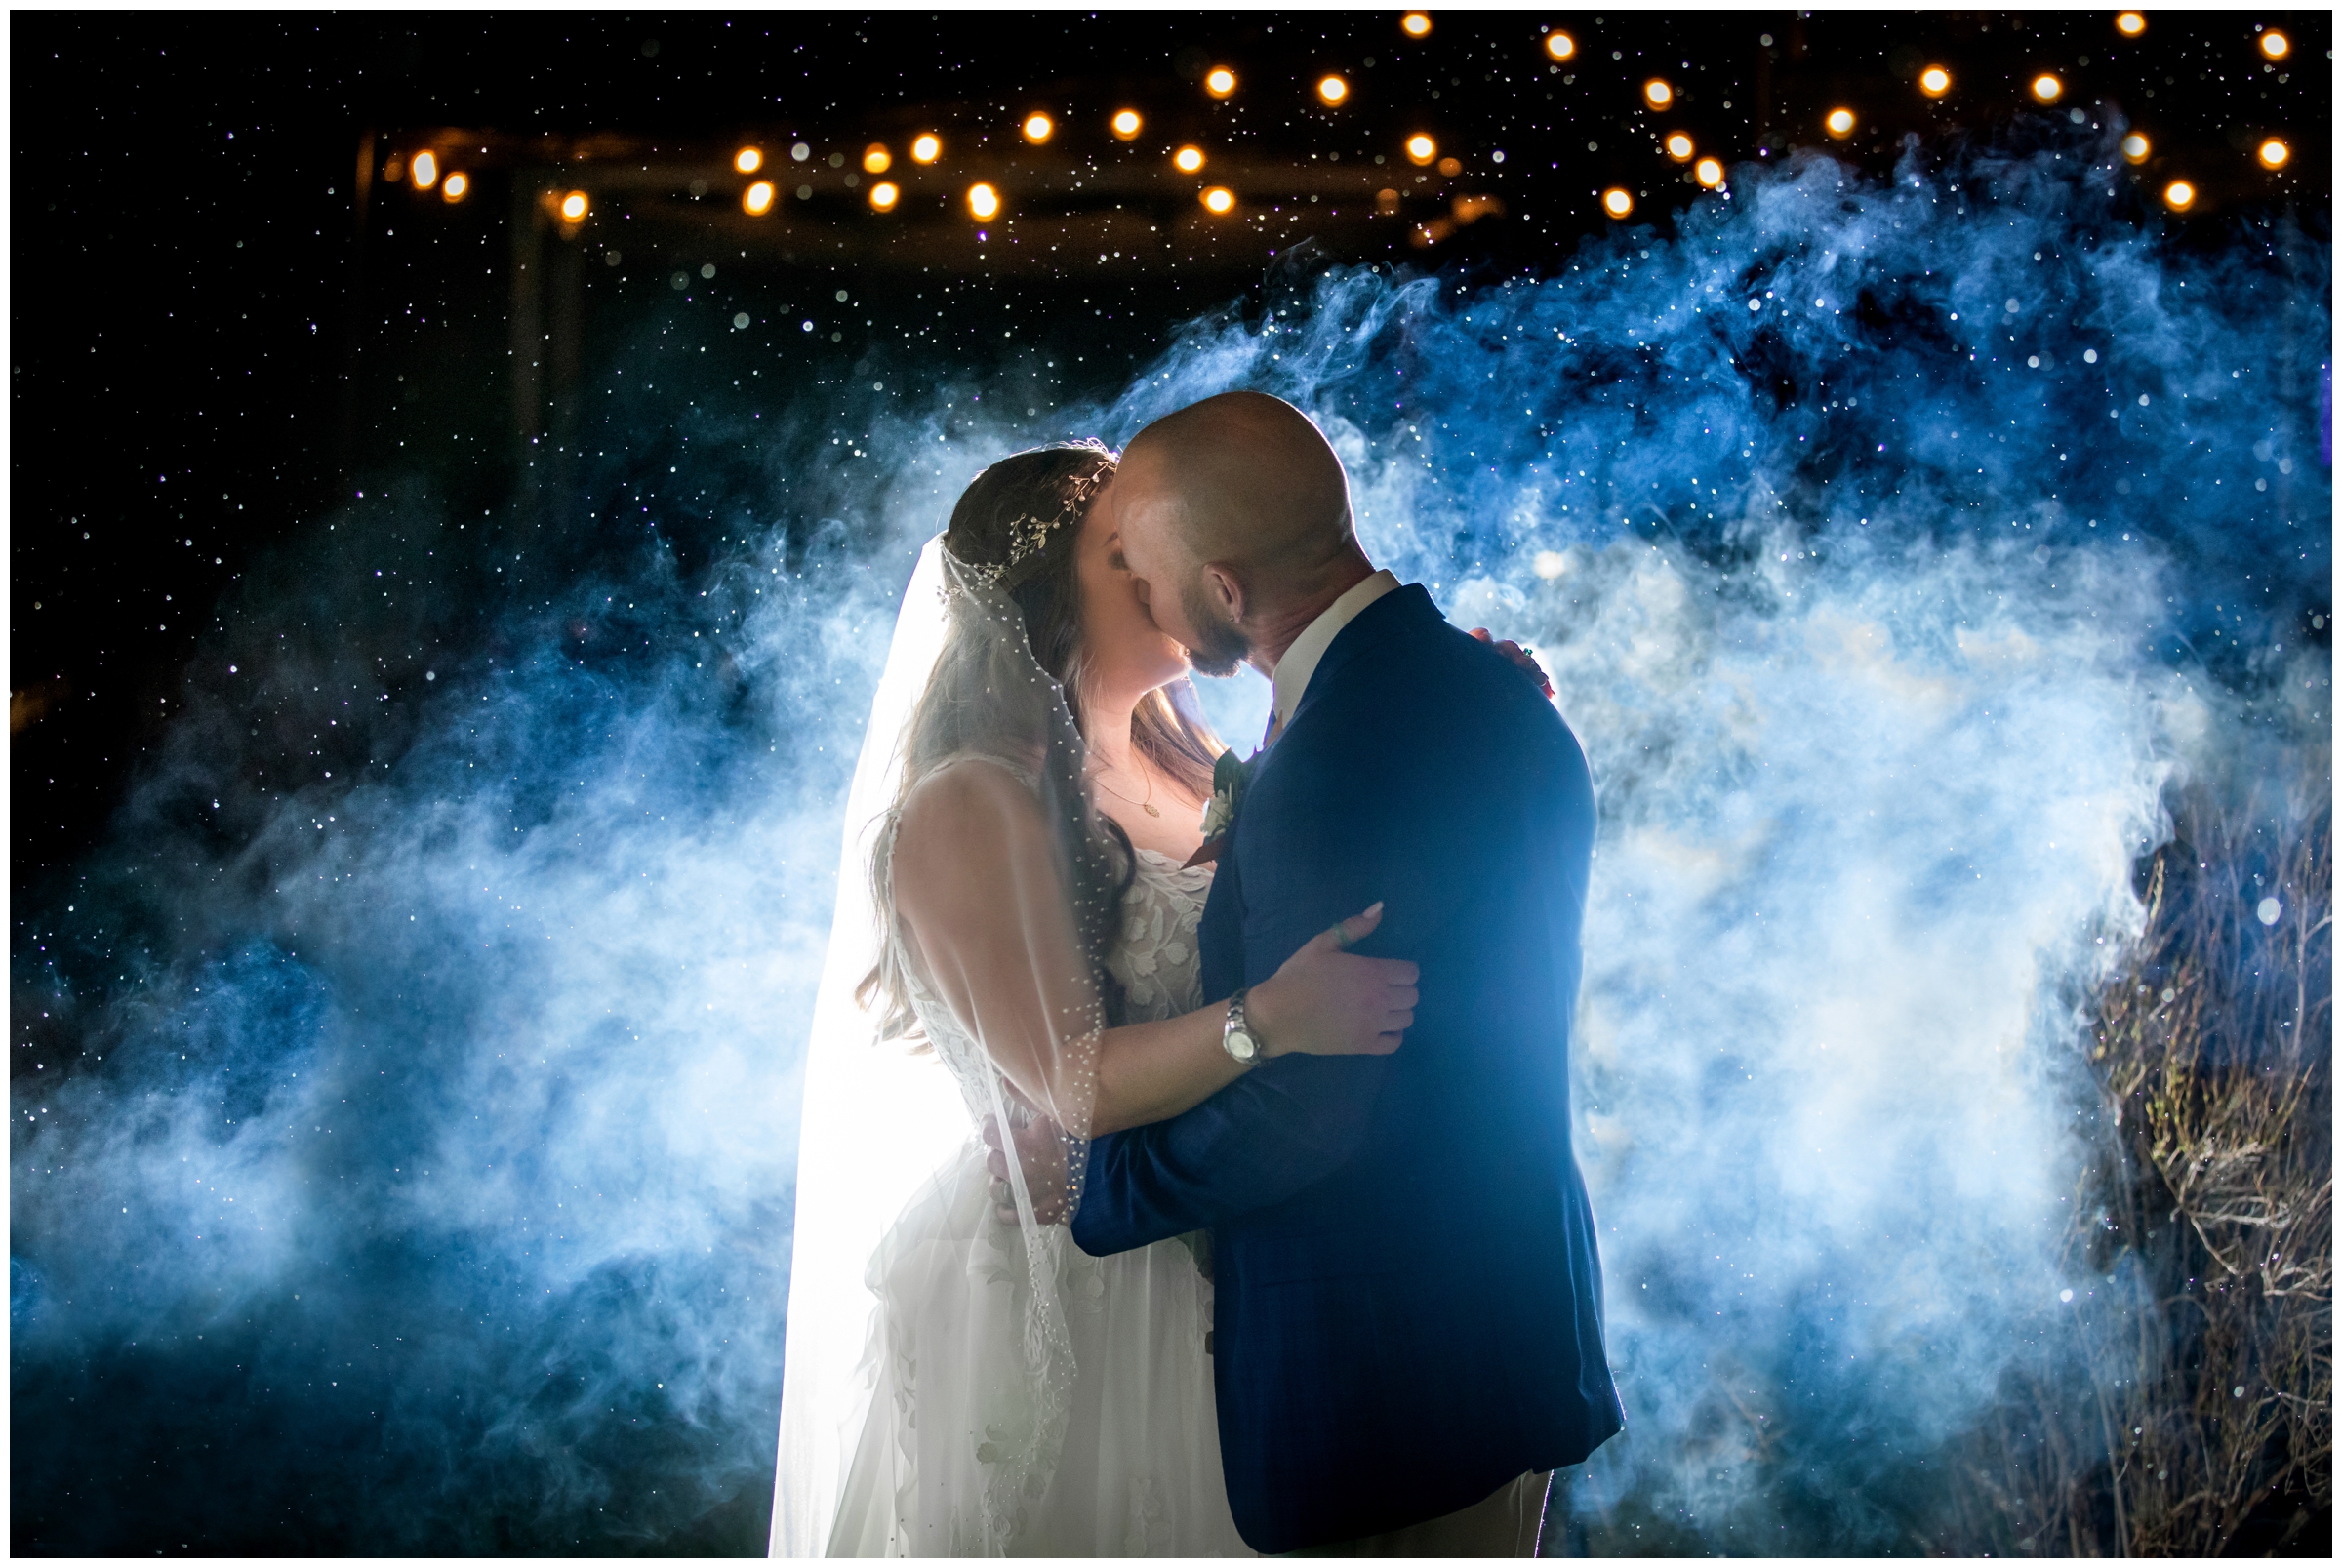 unique nighttime wedding pictures in Boulder Colorado at Wedgewood Weddings